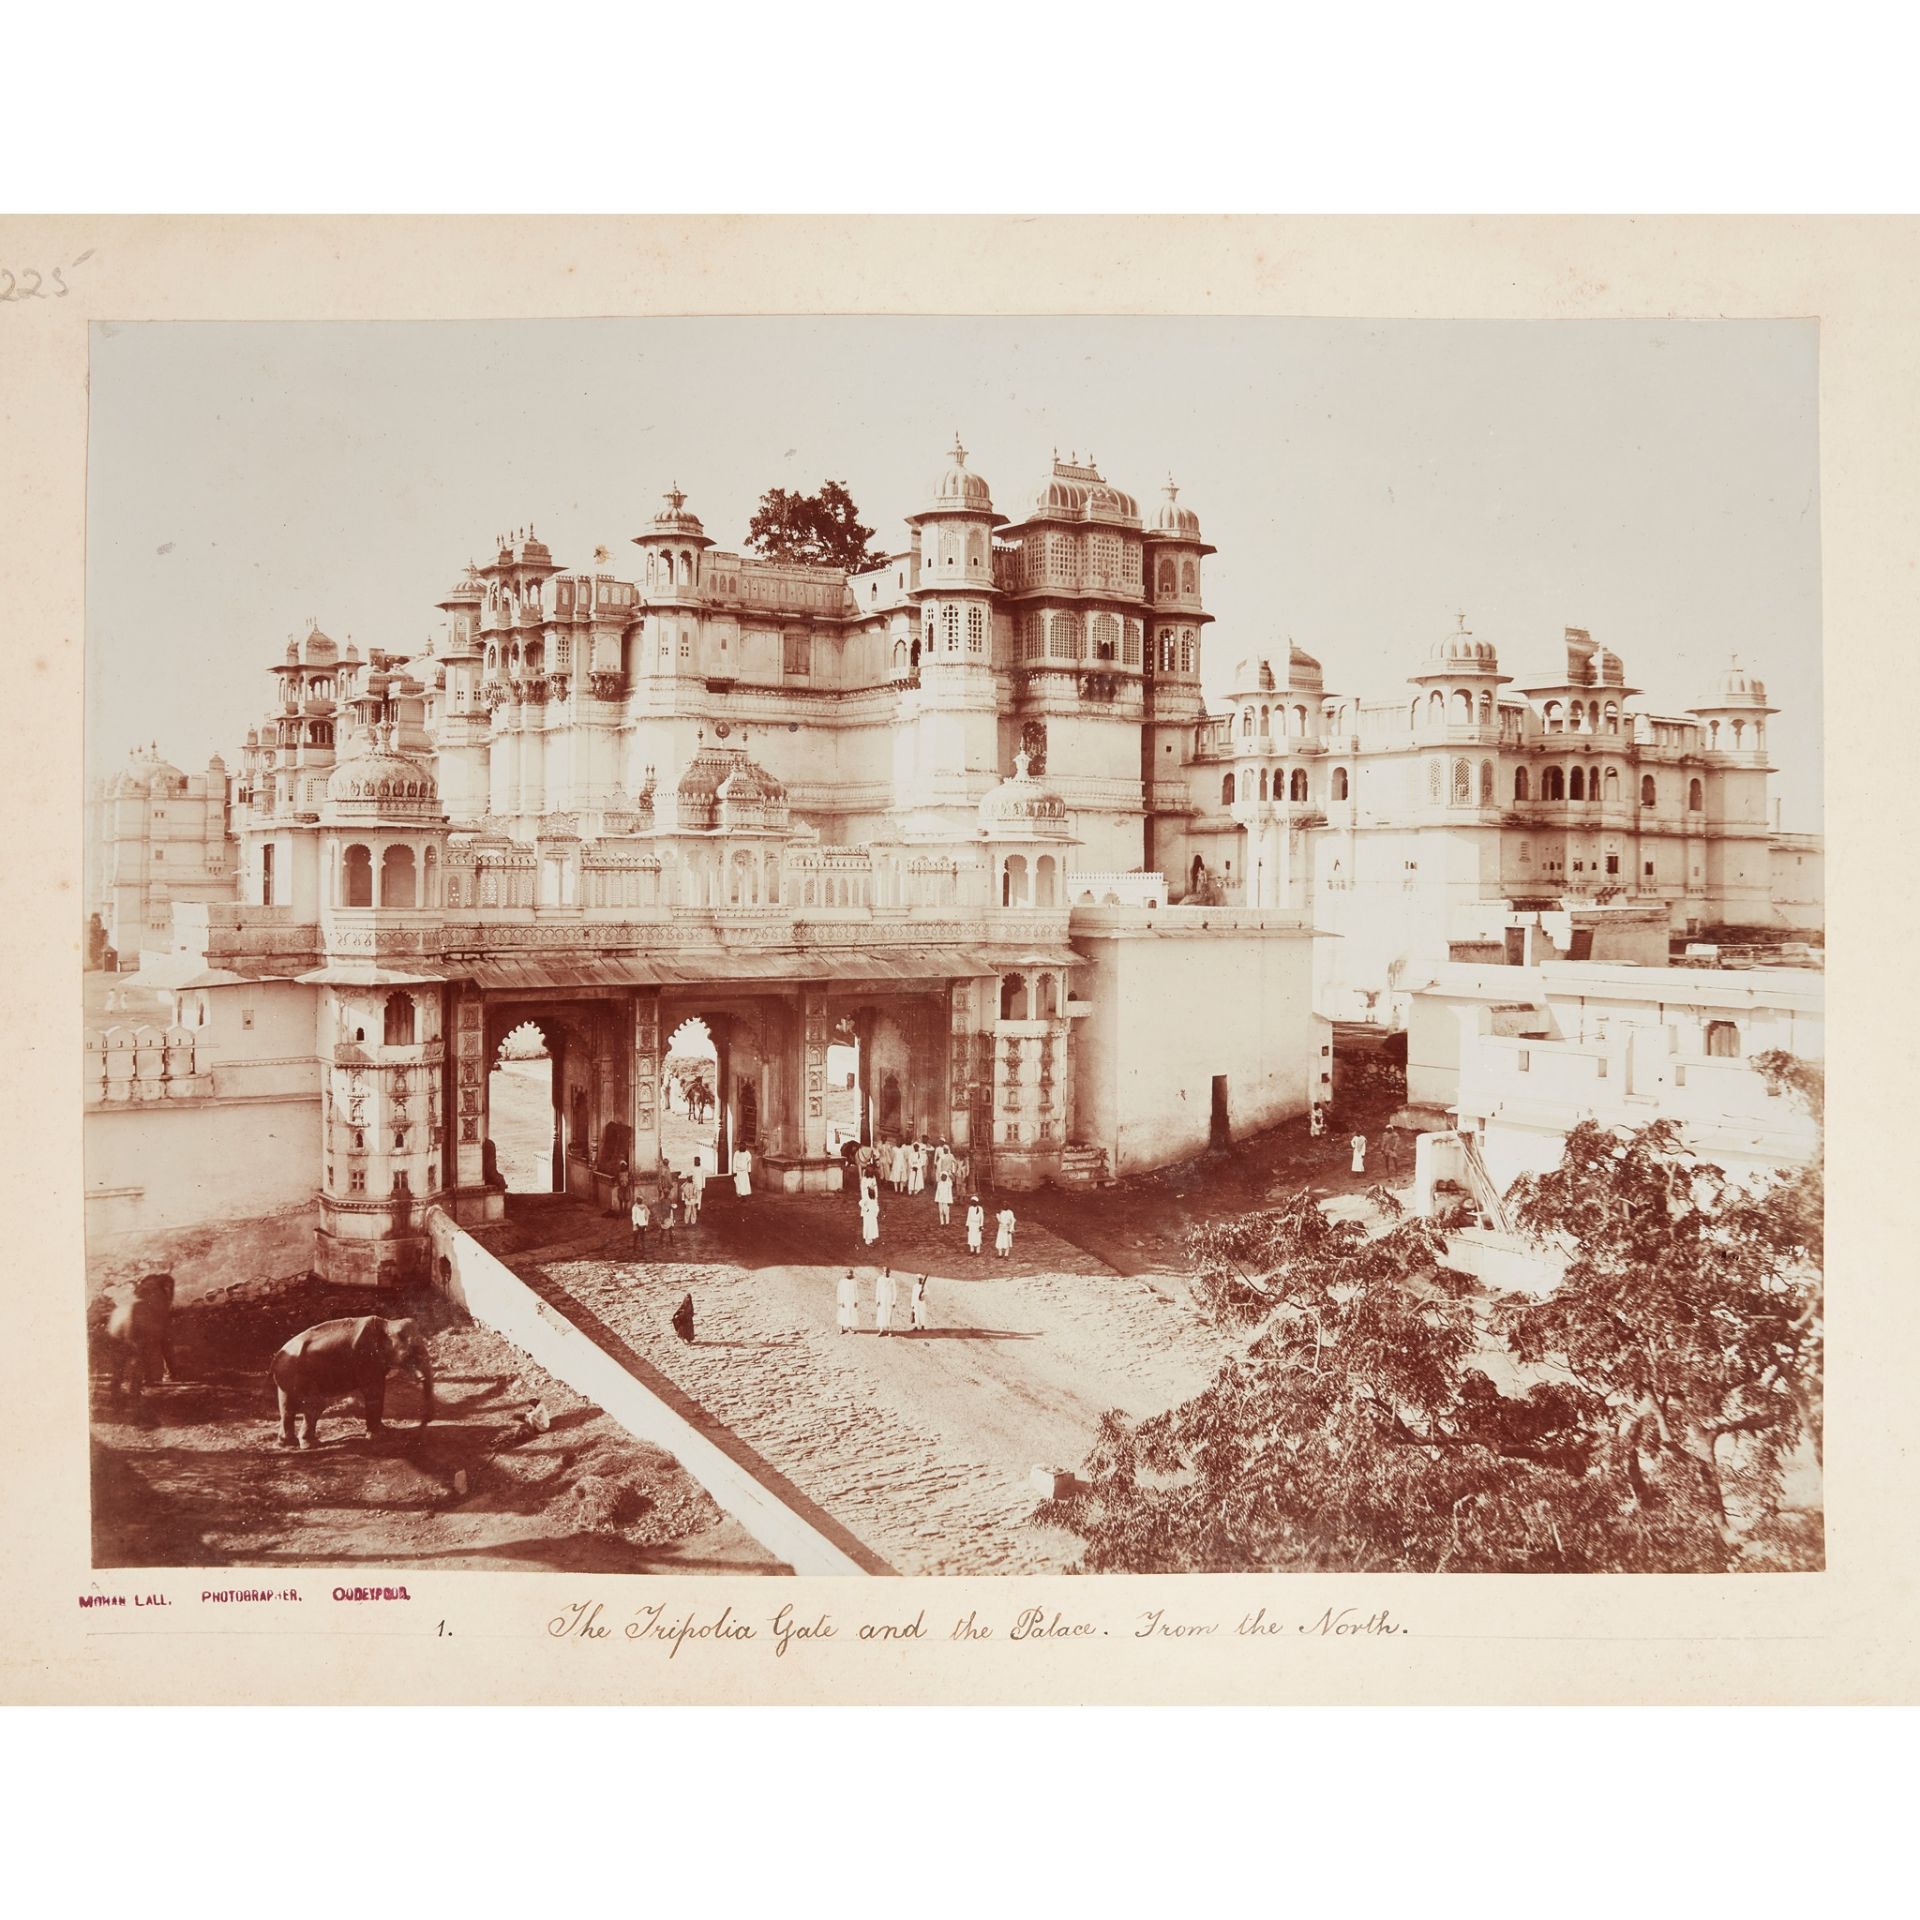 India: a photograph album Photographs of Rajasthan by Mohan Lal of Udaipur, late 19th century